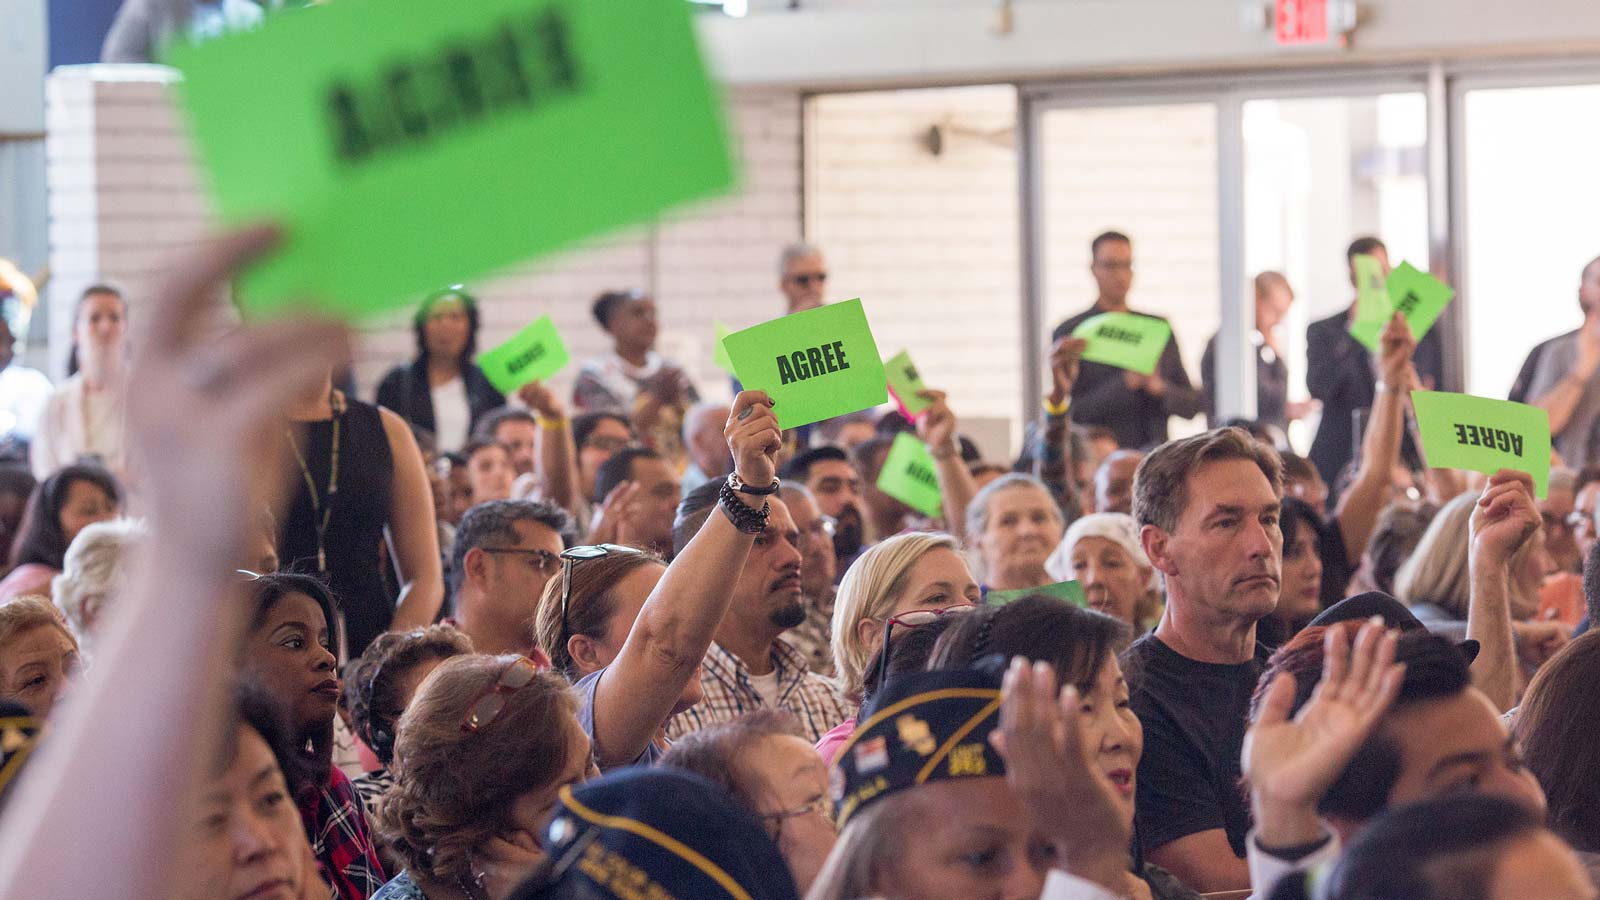 A crowd at a town hall holding up green sights that read “Agree.”